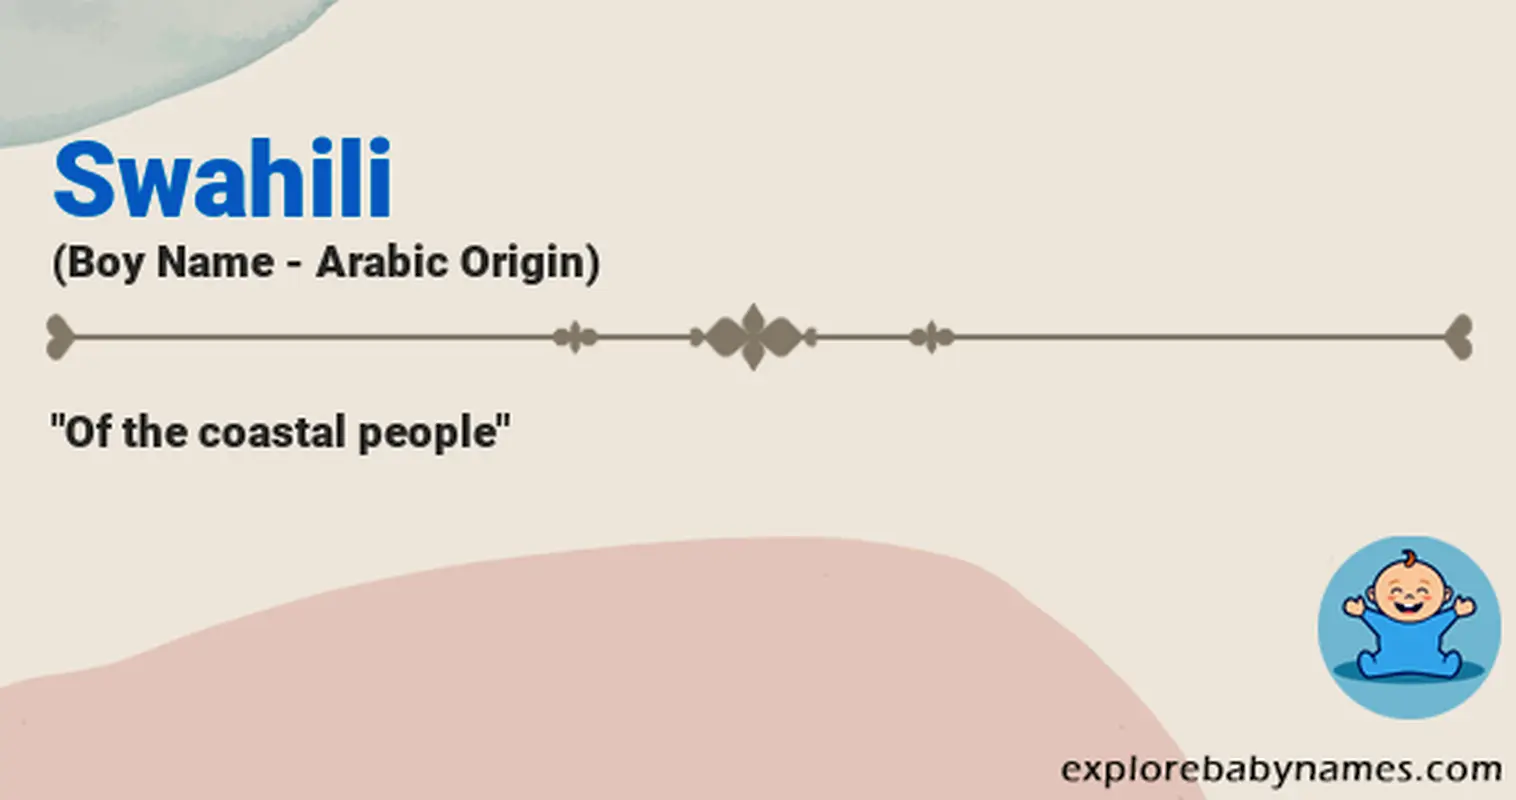 Meaning of Swahili